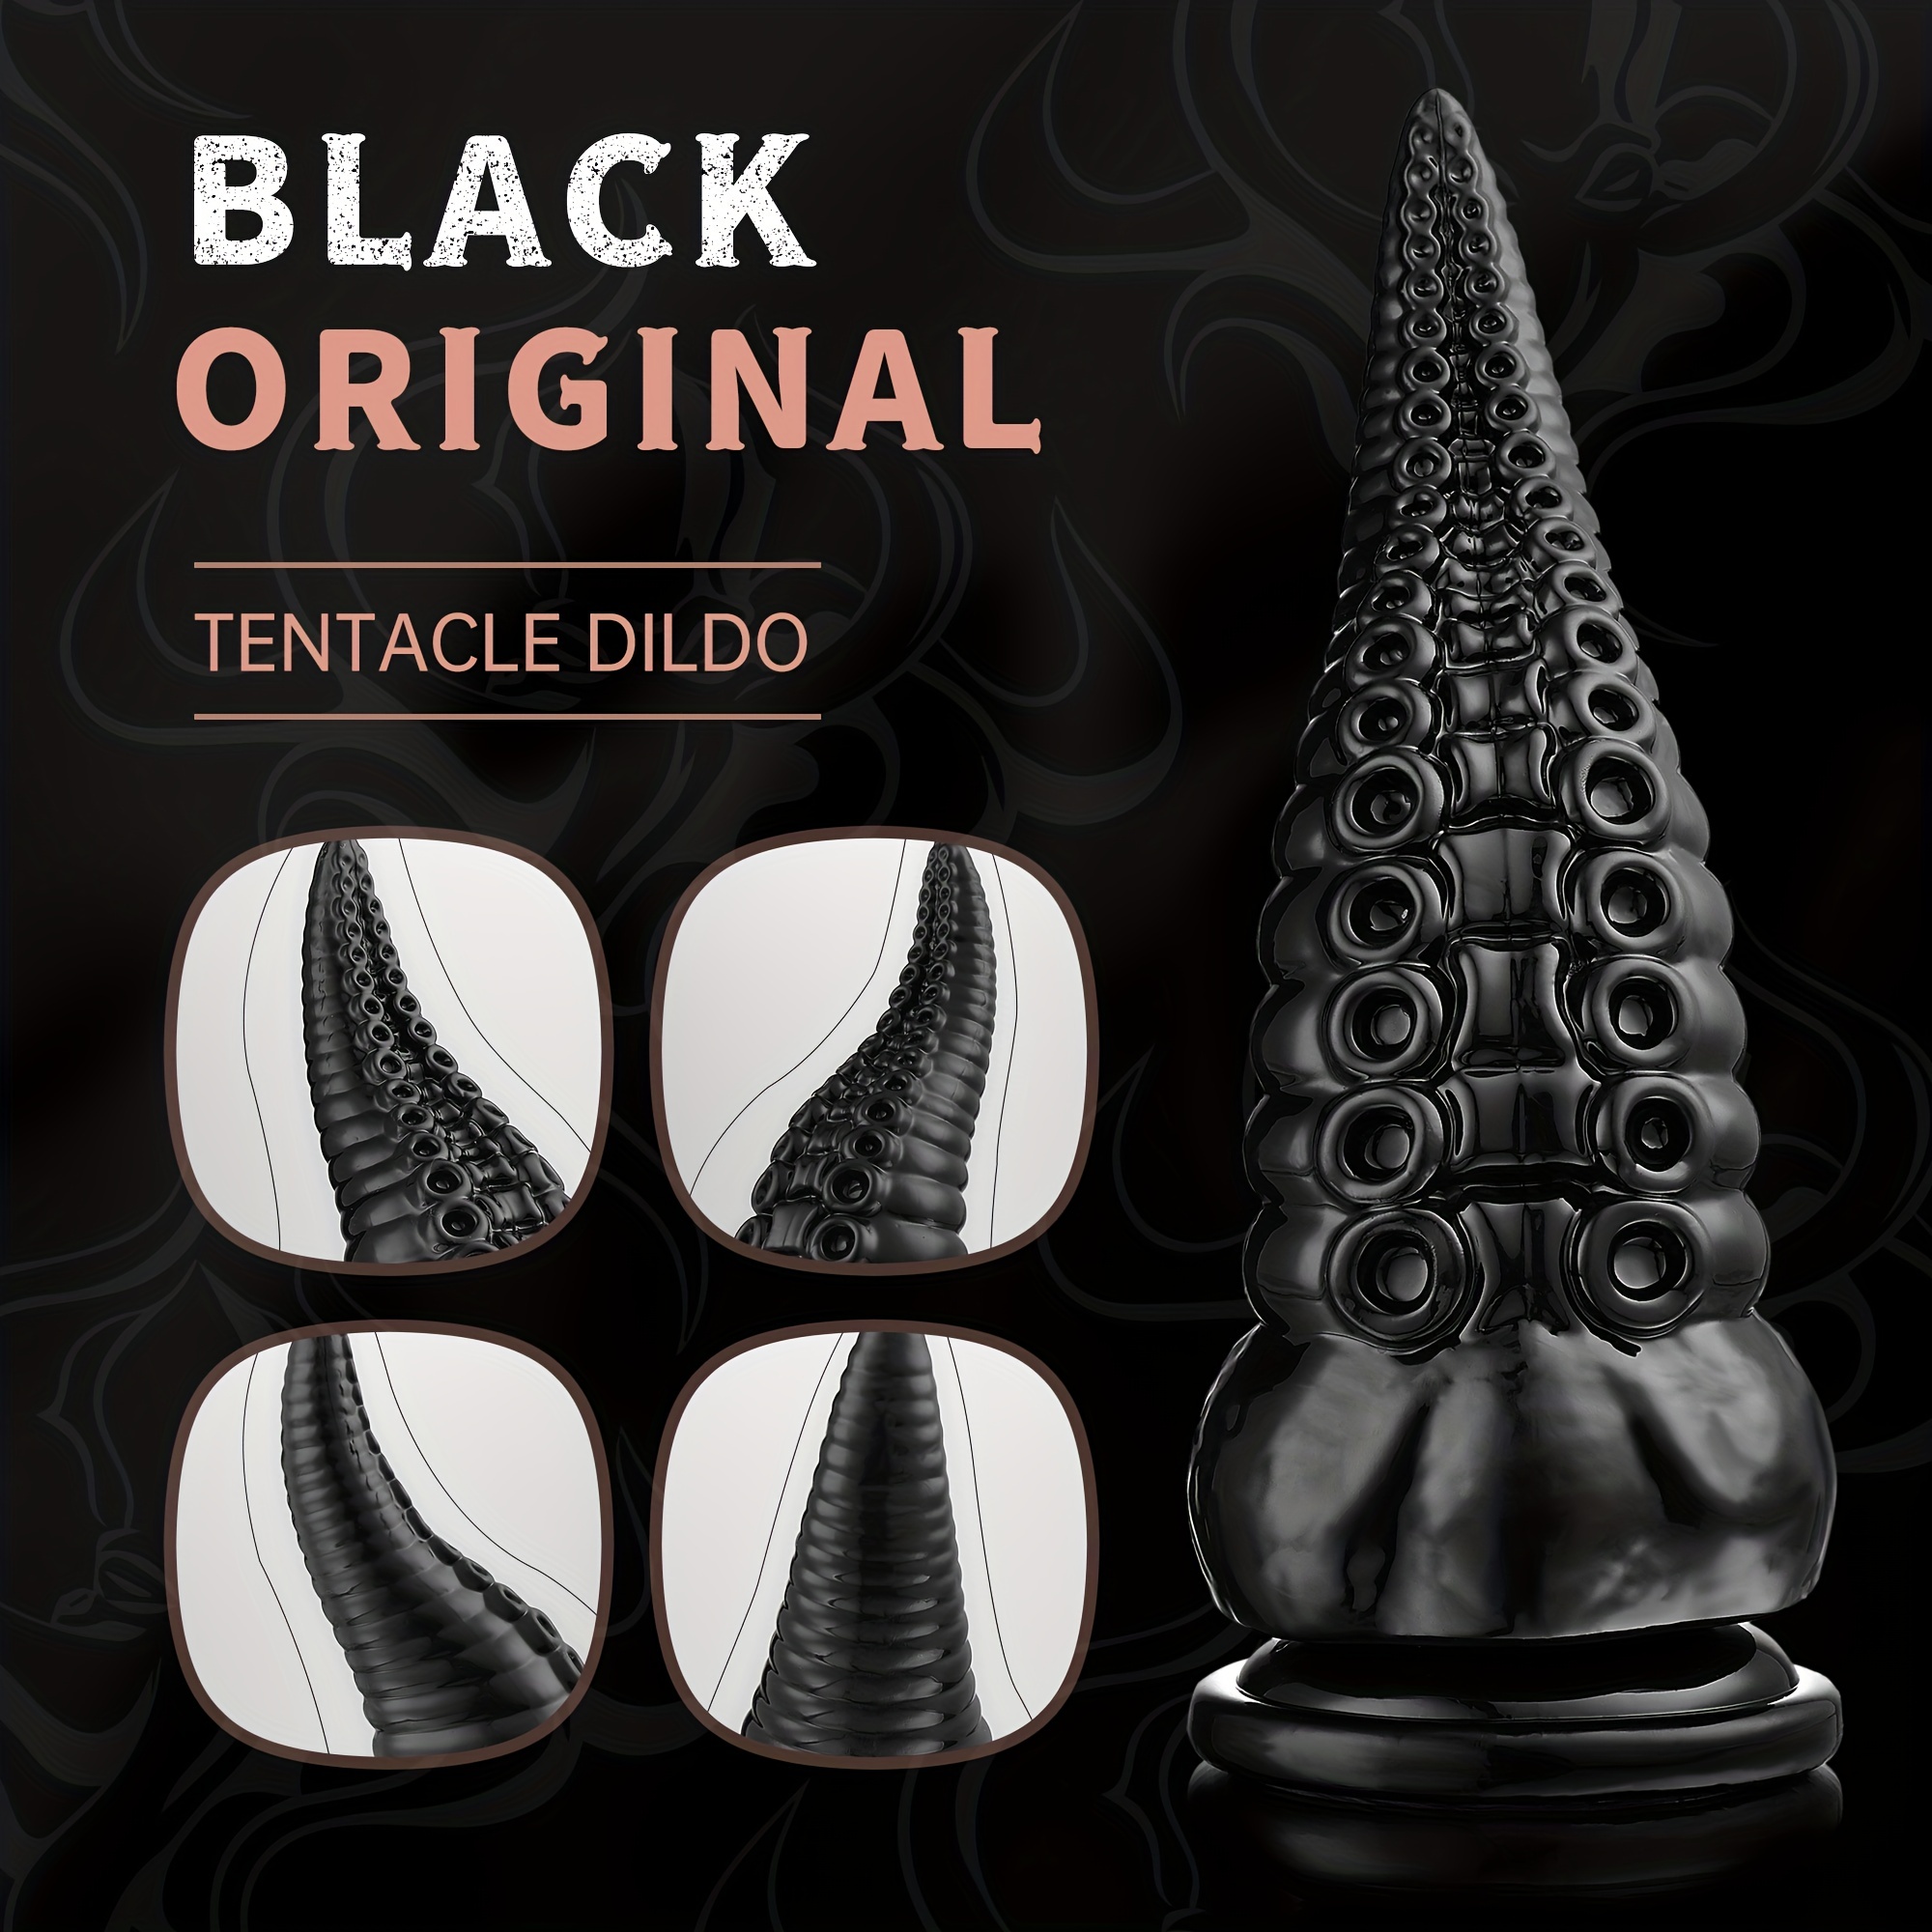 Experience Deep Throat Sex With This Realistic Tentacle Dildo - G Spot, Dragon, and G-spot Training Toys For Men and Women picture